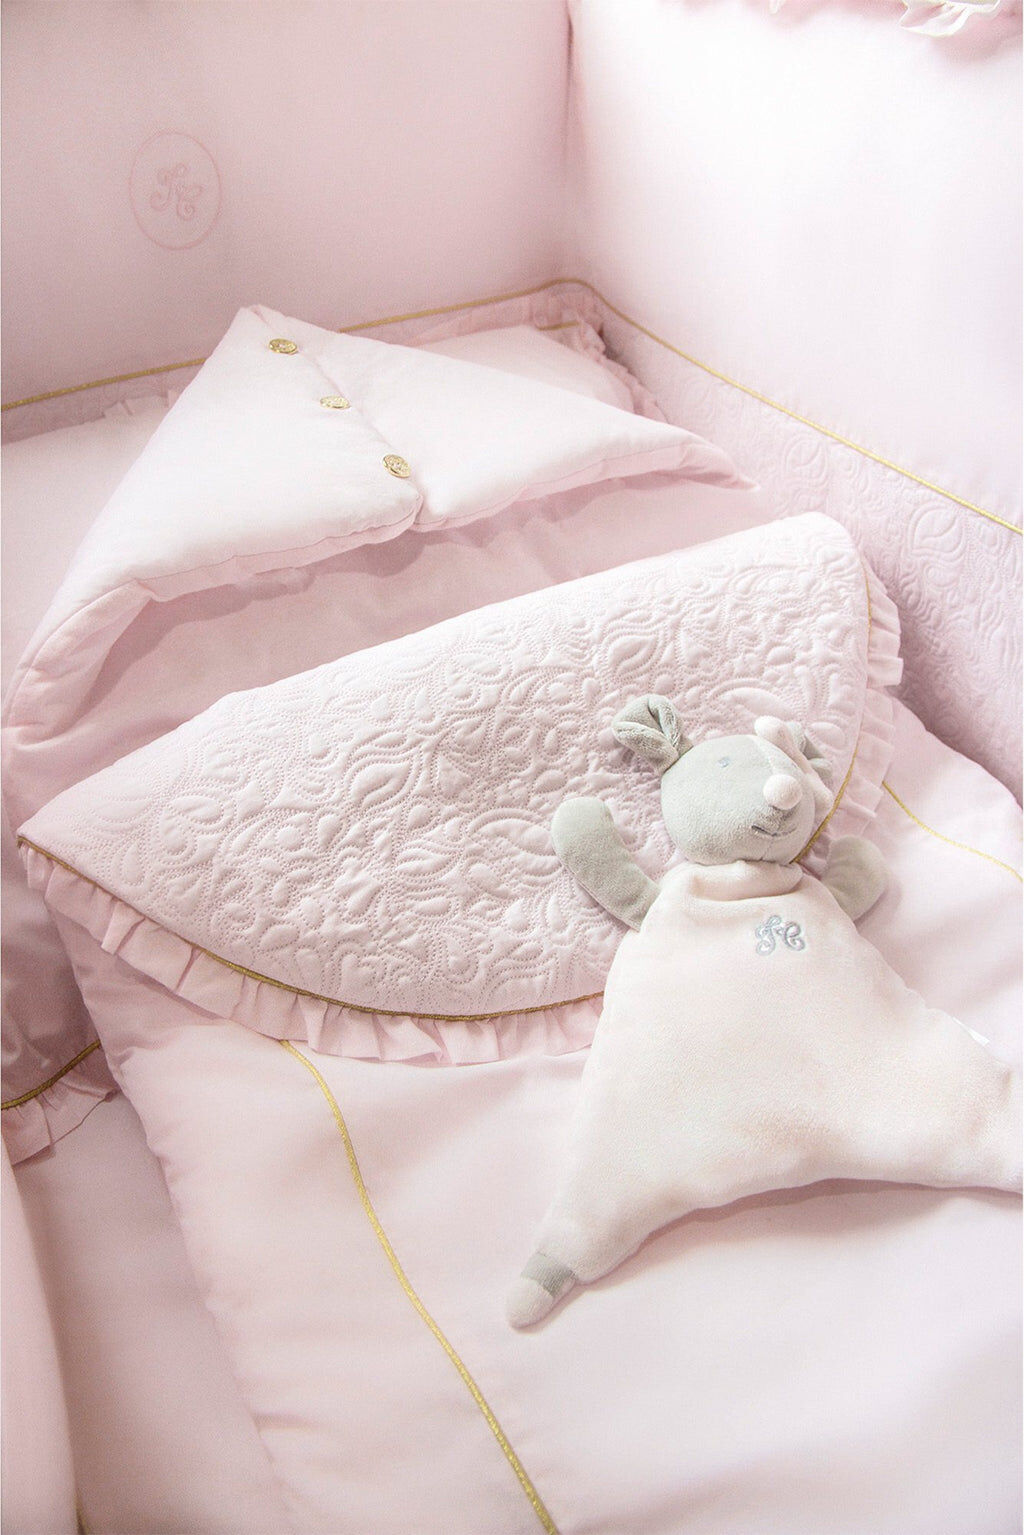 Baby nest - Delicacy Pale pink